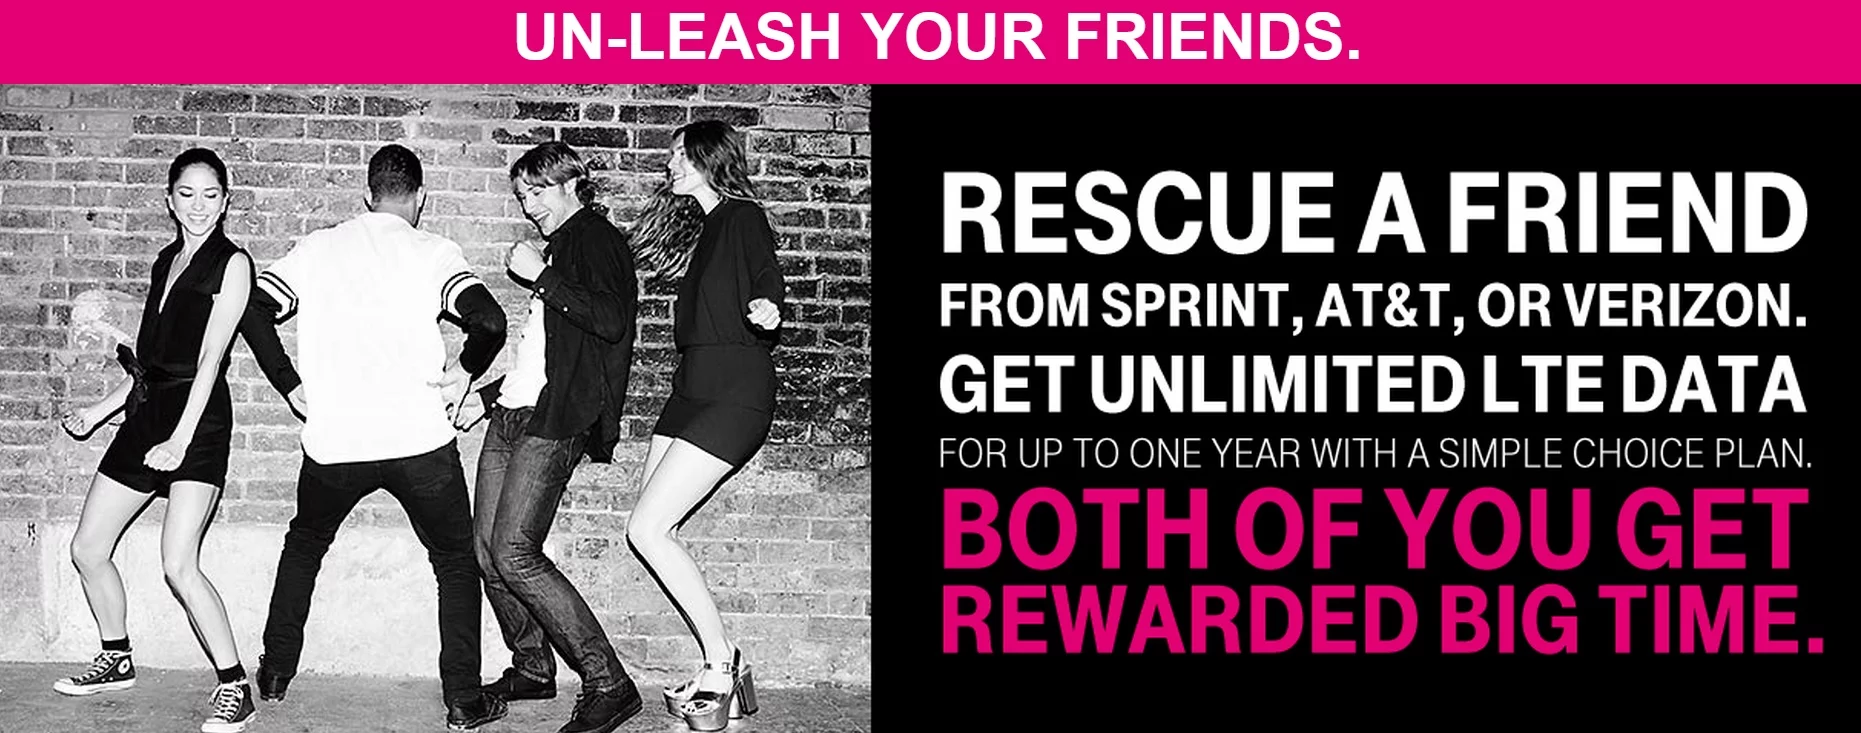 T Mobile referral - for some reason we don't have an alt tag here